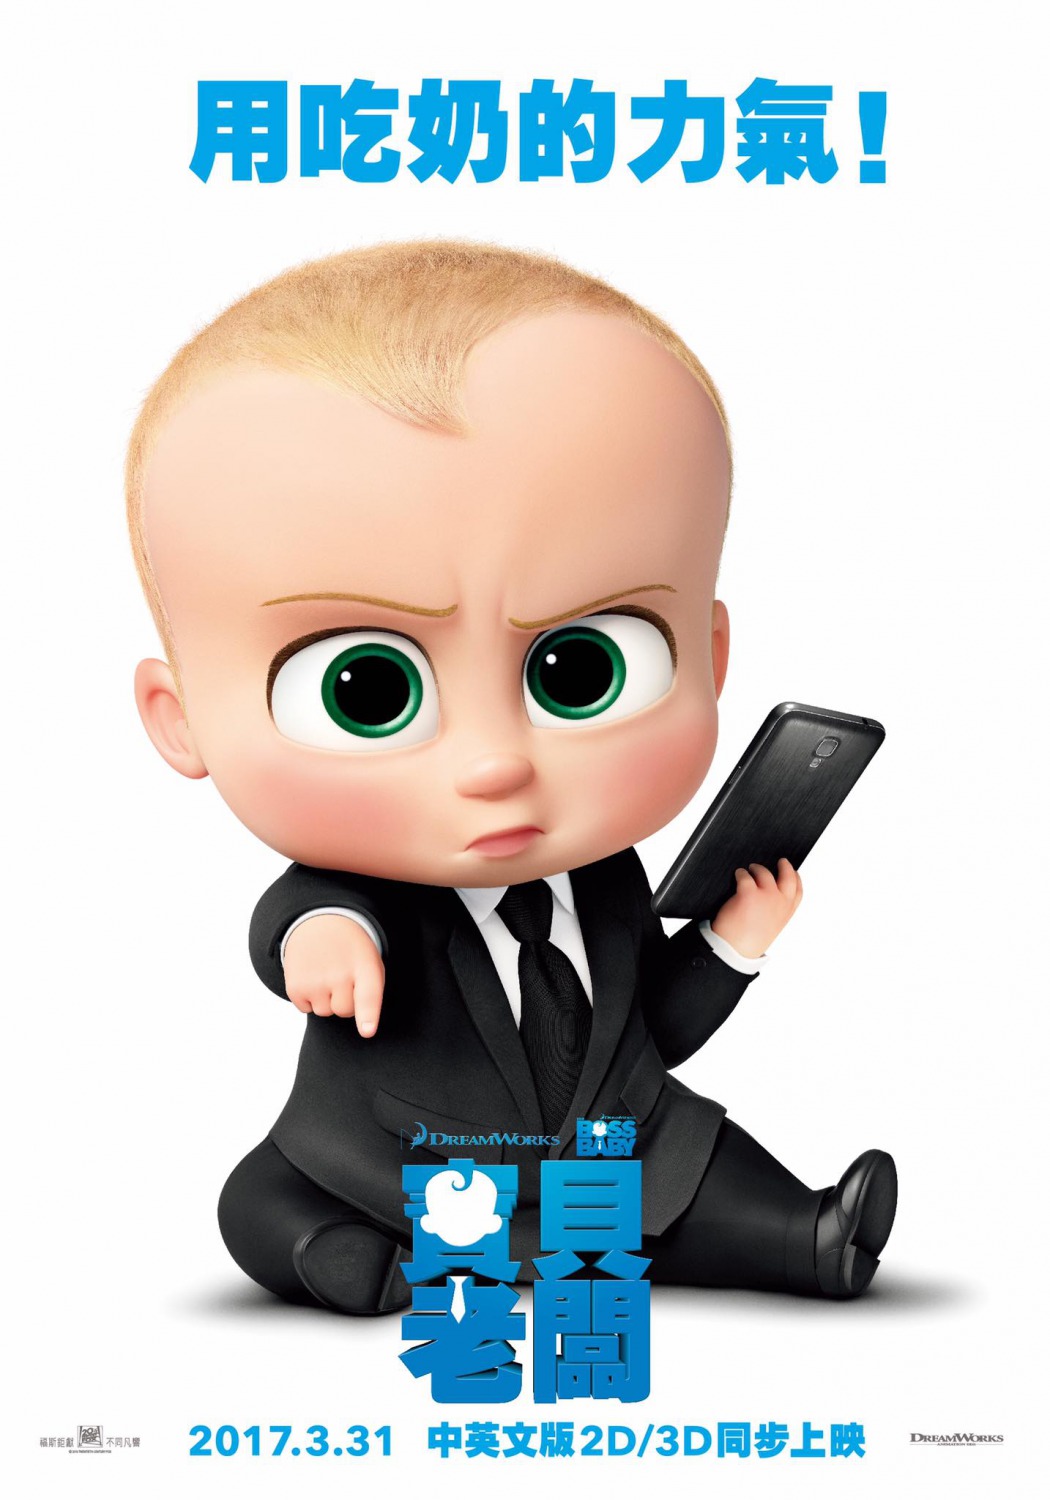 Extra Large Movie Poster Image for The Boss Baby (#5 of 7)